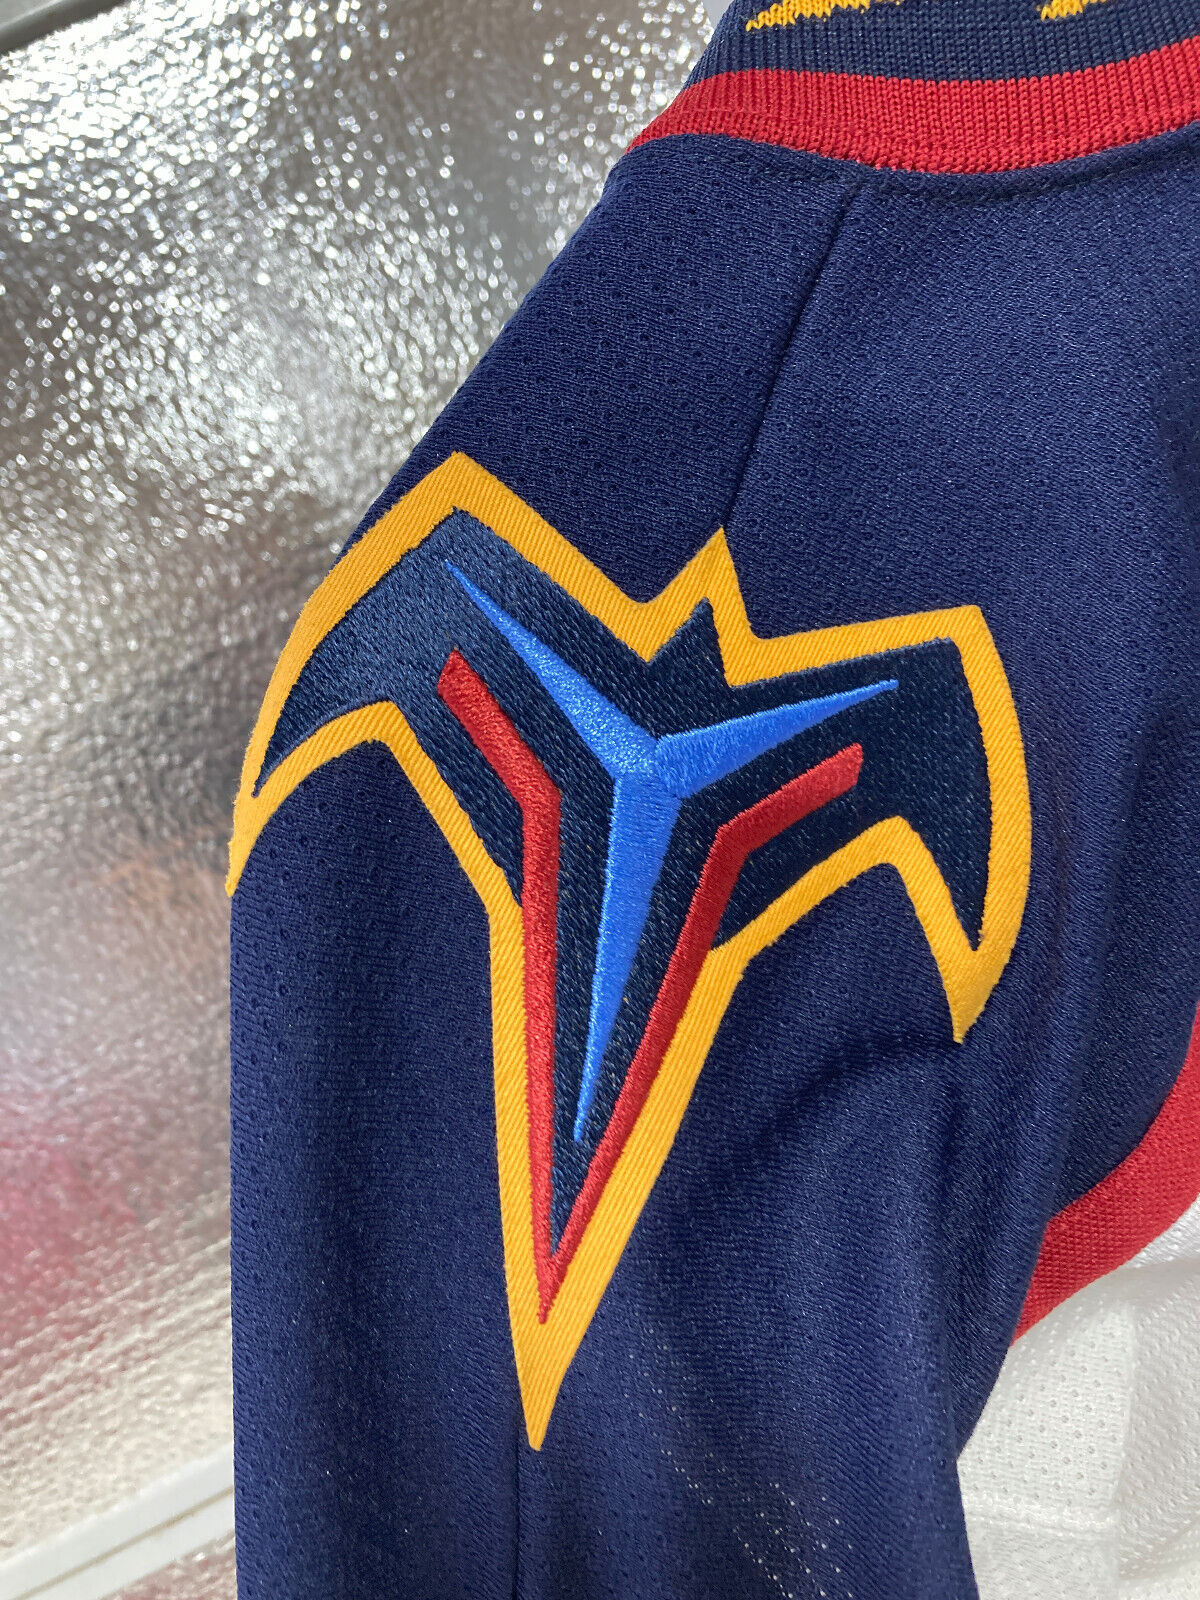  Outerstuff NHL Atlanta Thrashers Alternate Color Replica Jersey  - Youth : Sports & Outdoors